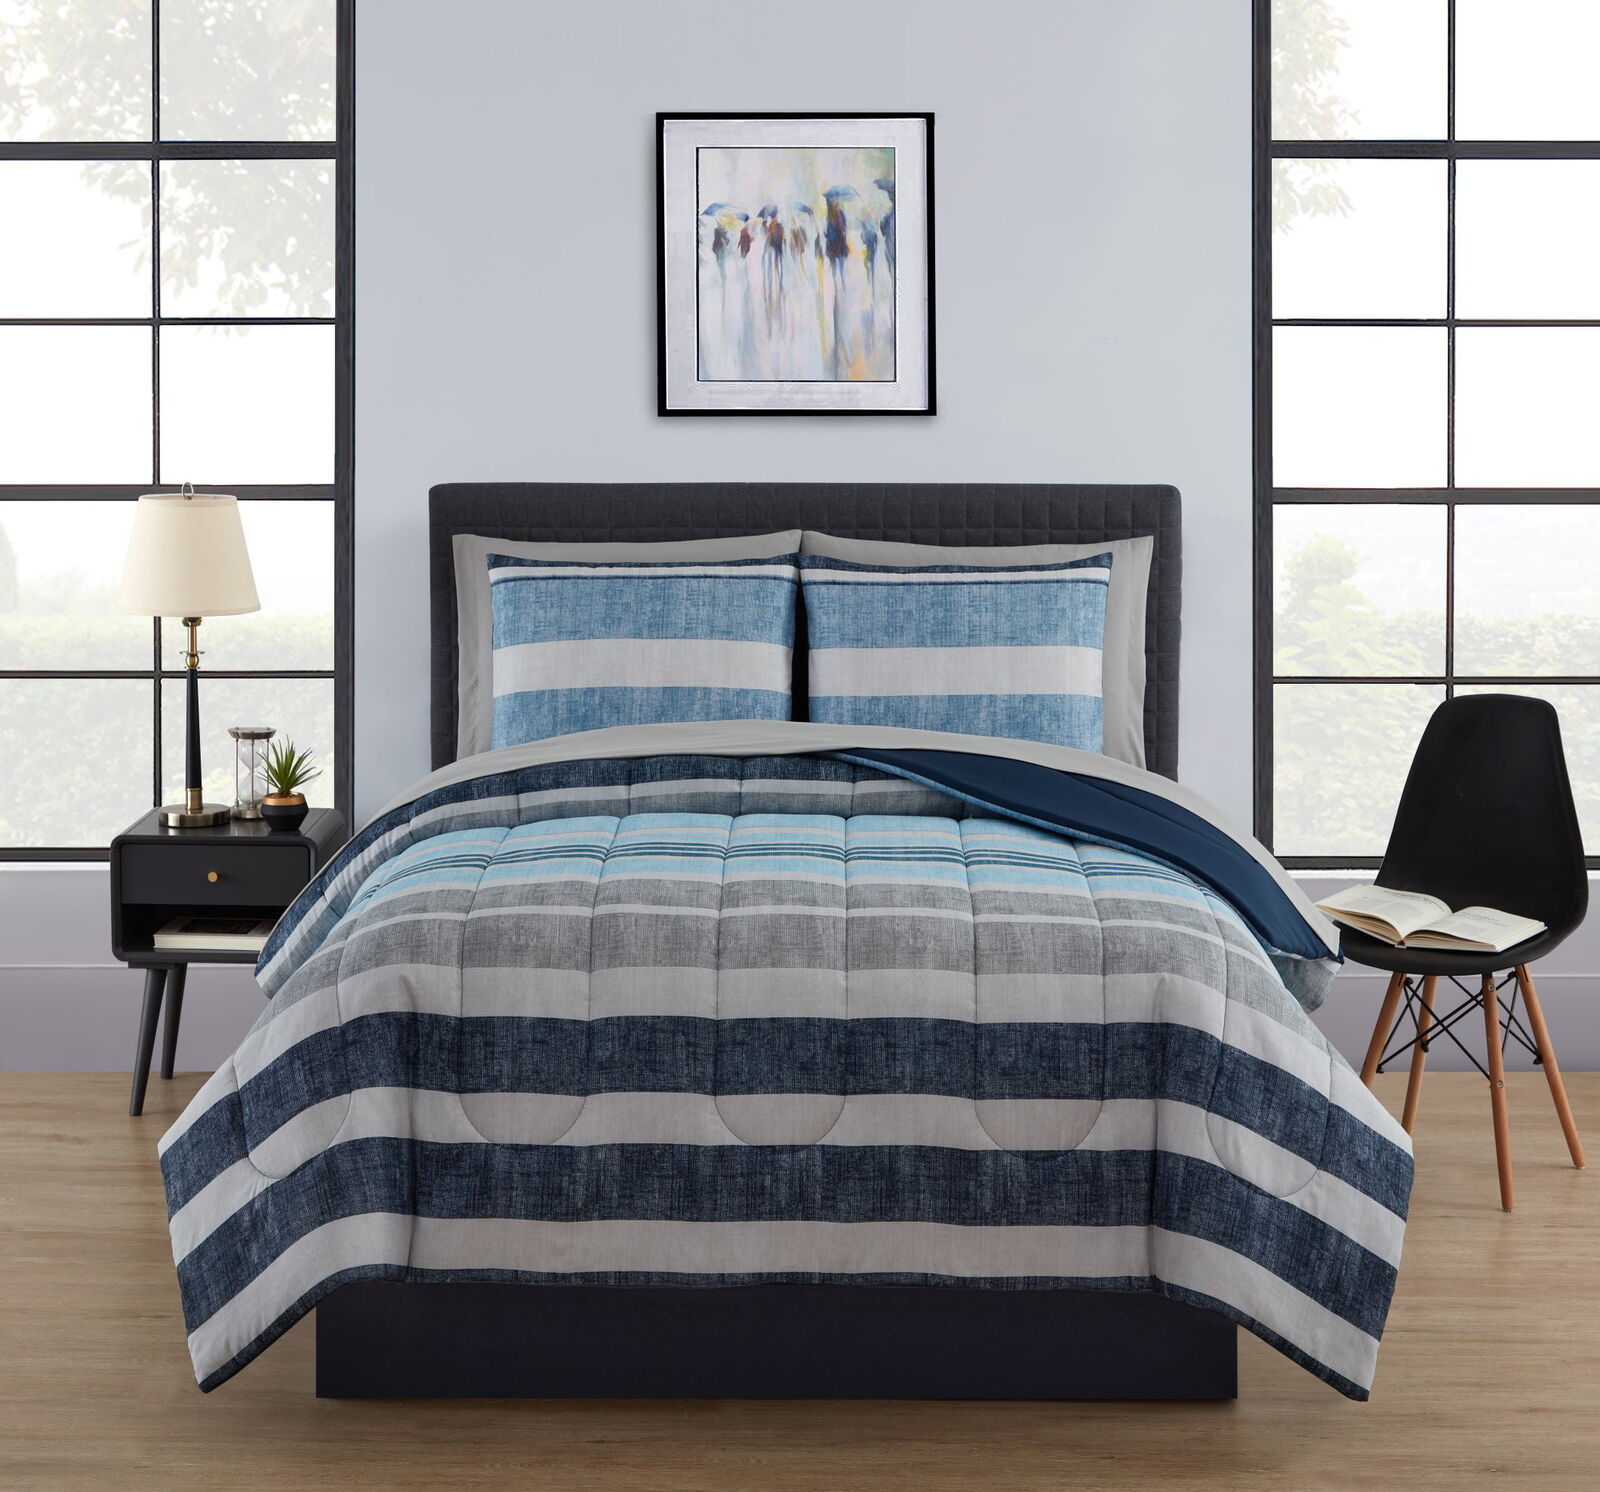 Queen Bed in a Bag 7-Piece Comforter Bedding Set Sheets Blue Gray White Stripes - $52.68